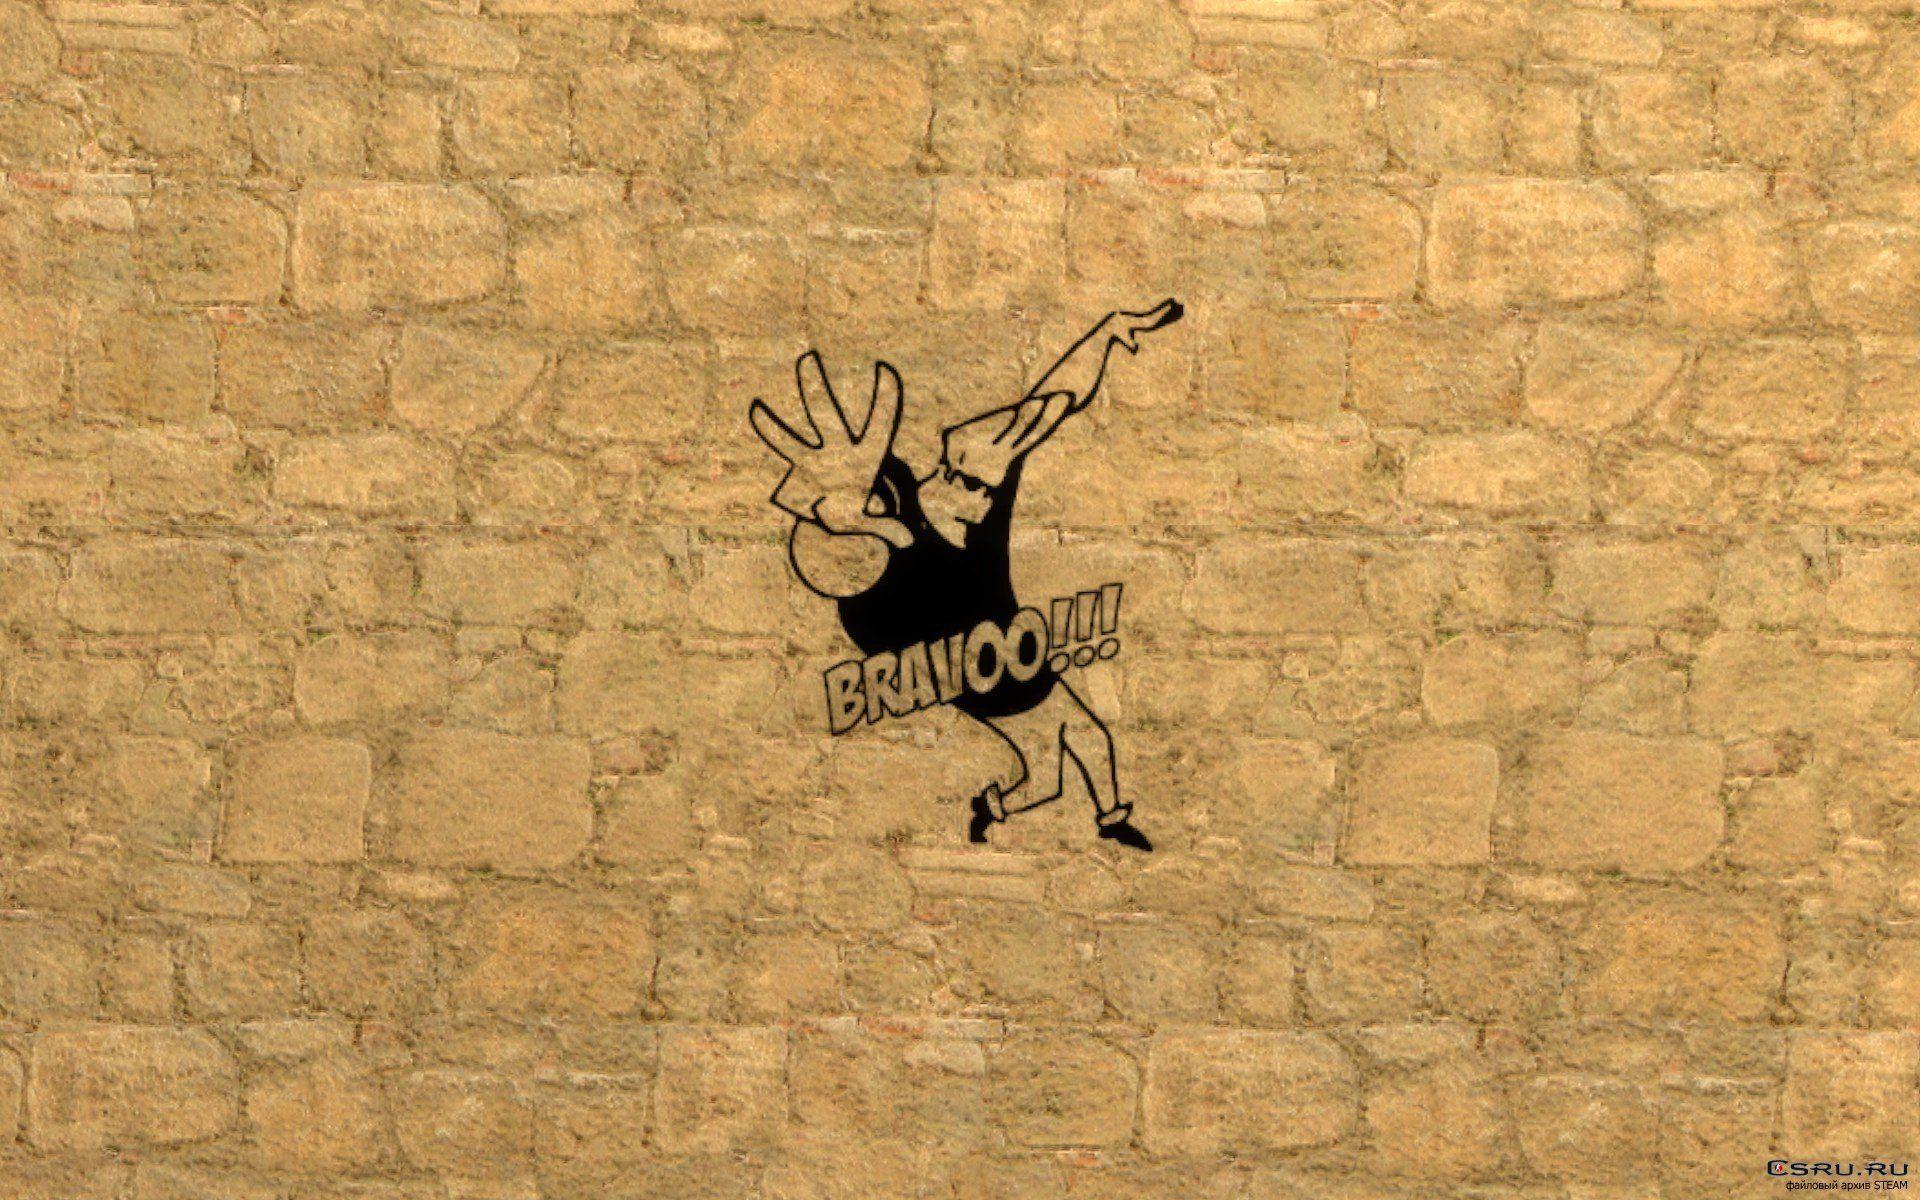 Johnny Bravo on the wall wallpaper and image